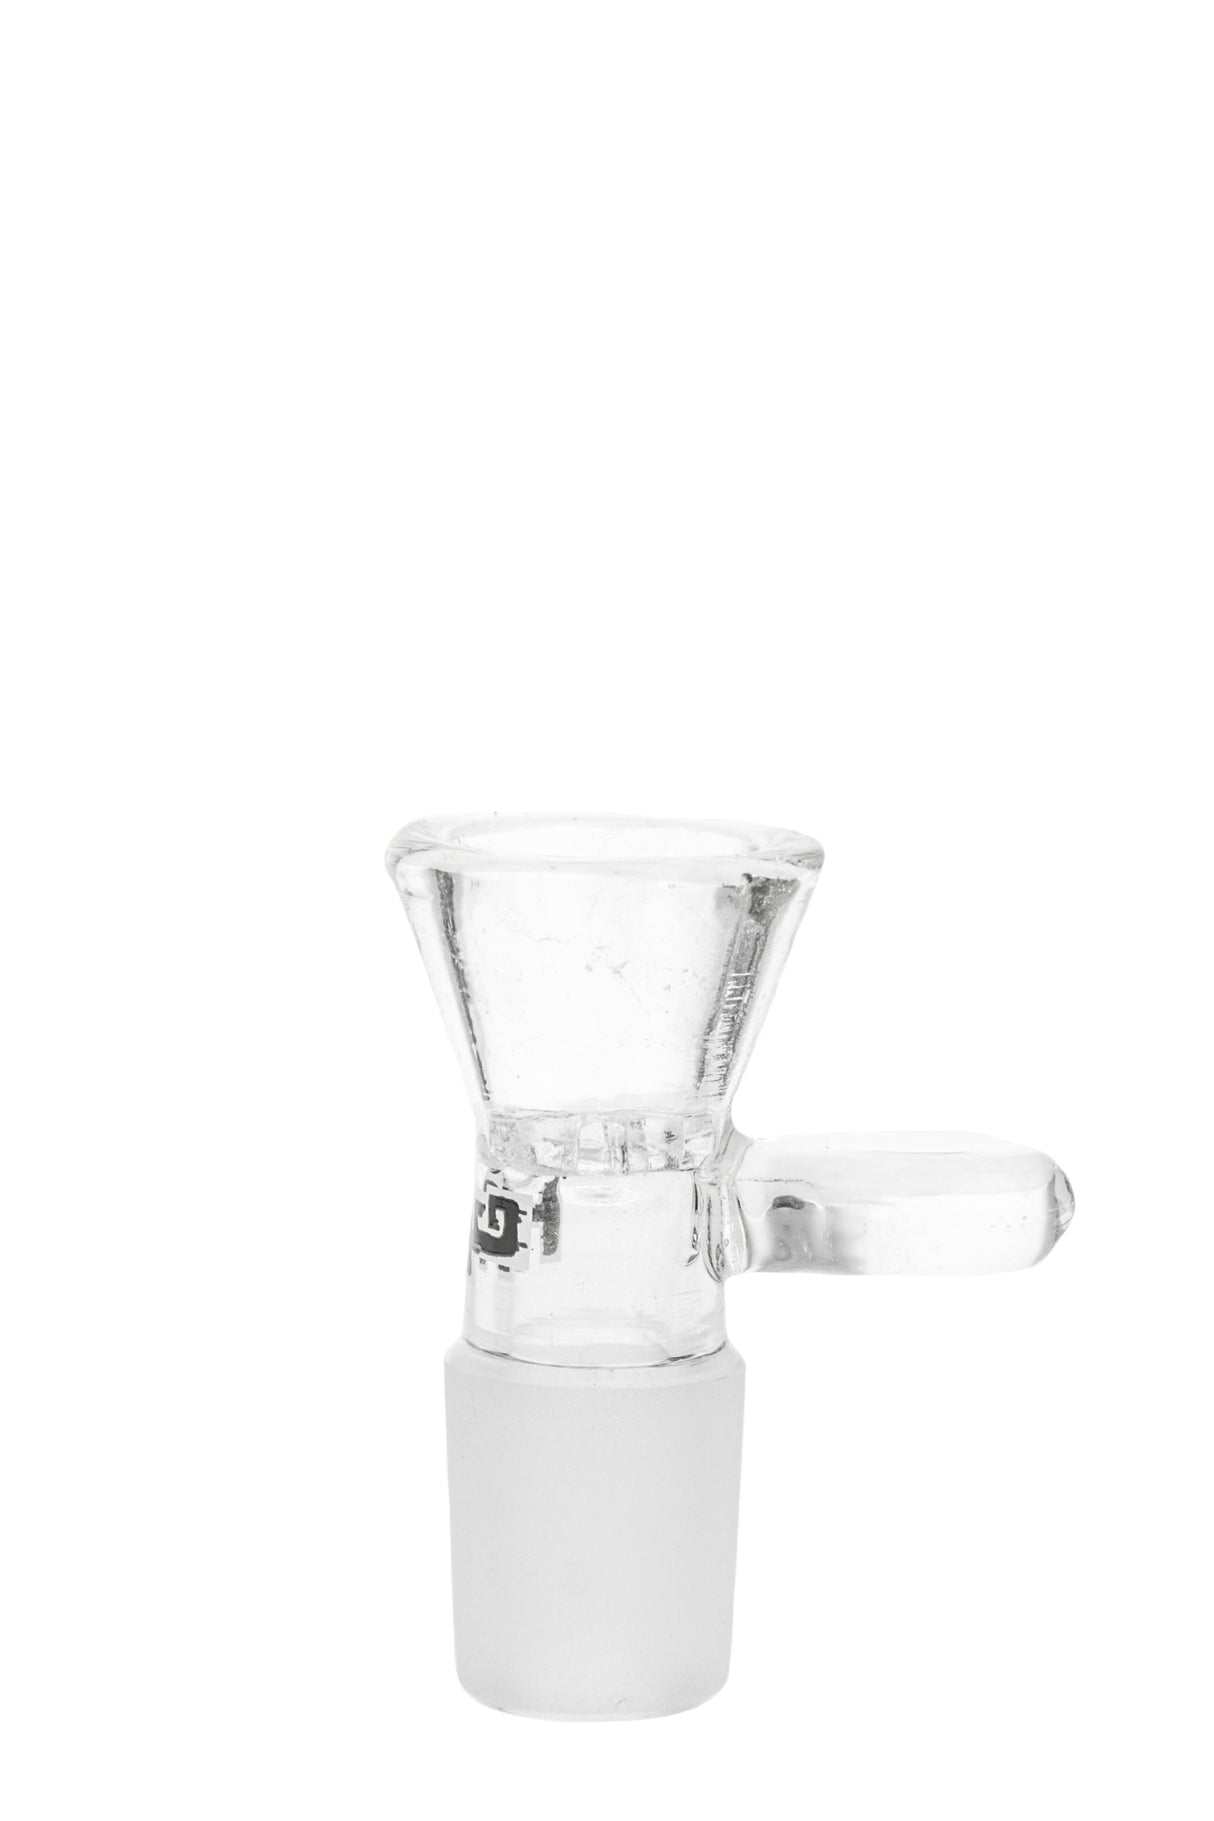 TAG Rasta Tie Dye Bong Bowl with Built-In Screen and Handle, Front View on White Background